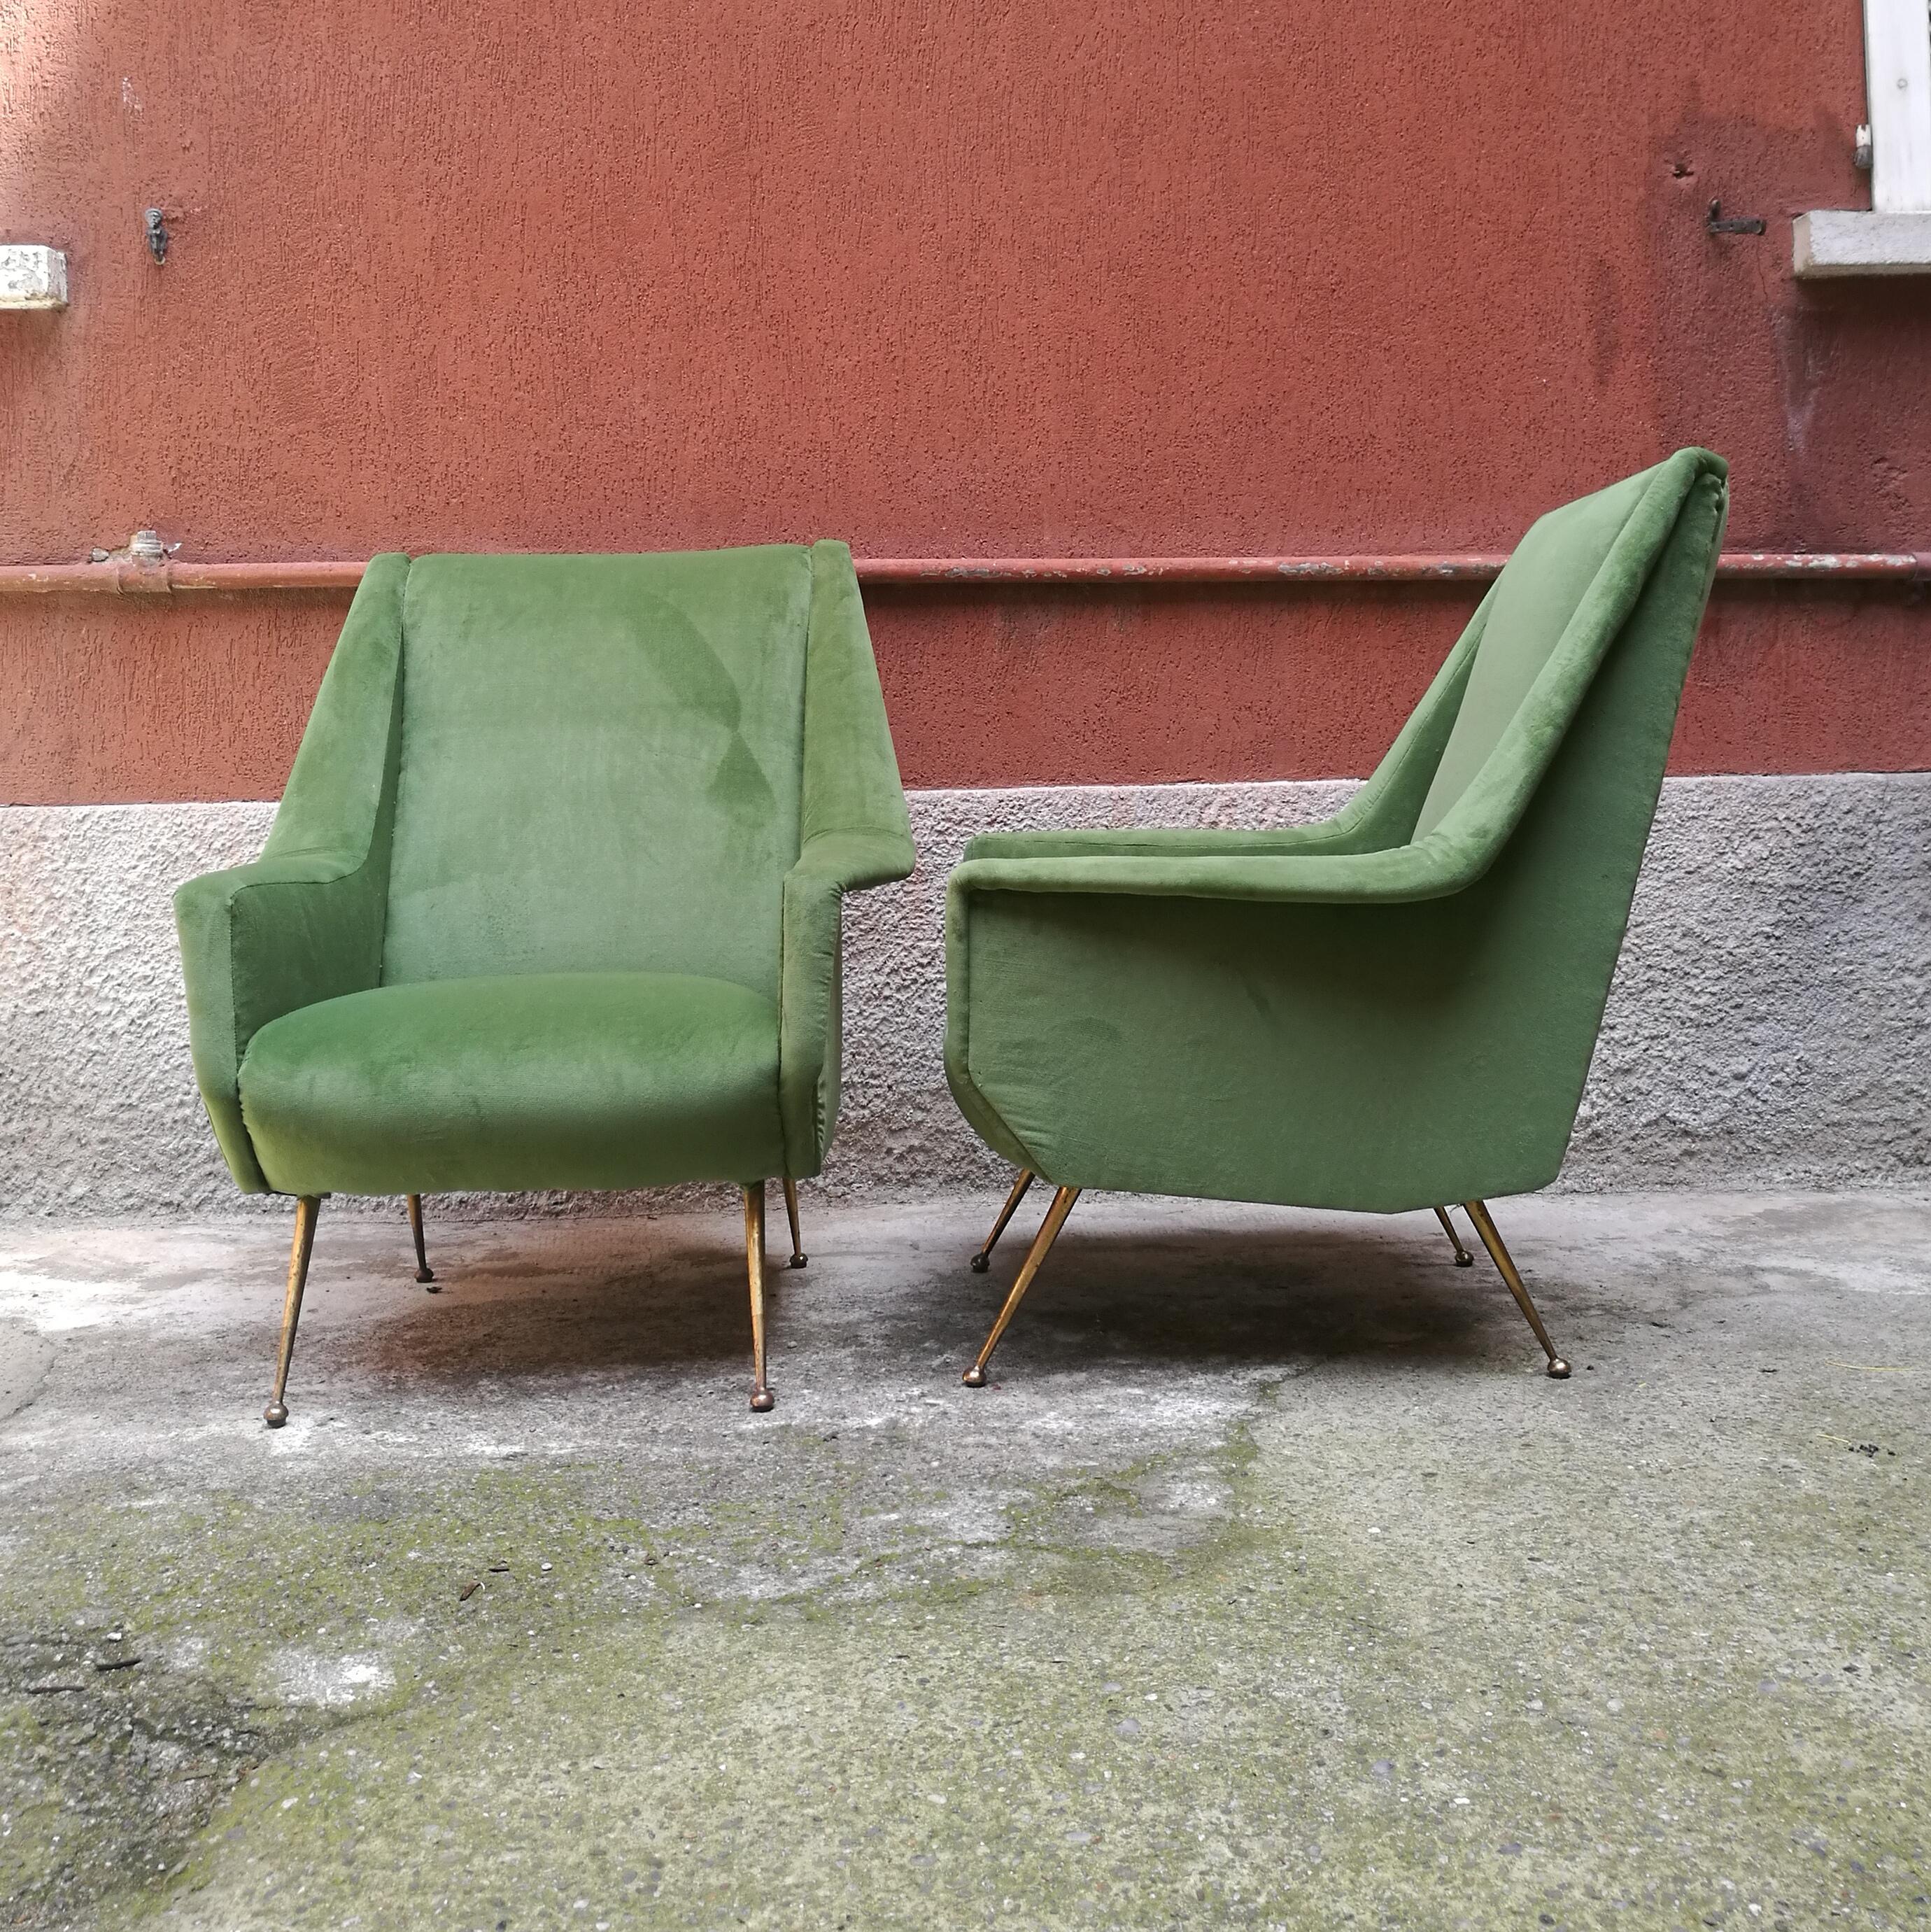 Couple of Italian velvet armchairs, 1950s
Superb couple of italian fauteilles from fifties. This great Classic as been completely reupholstered with green velvet. The structure stands on four elegant legs made in brass. Comfort is given both by the